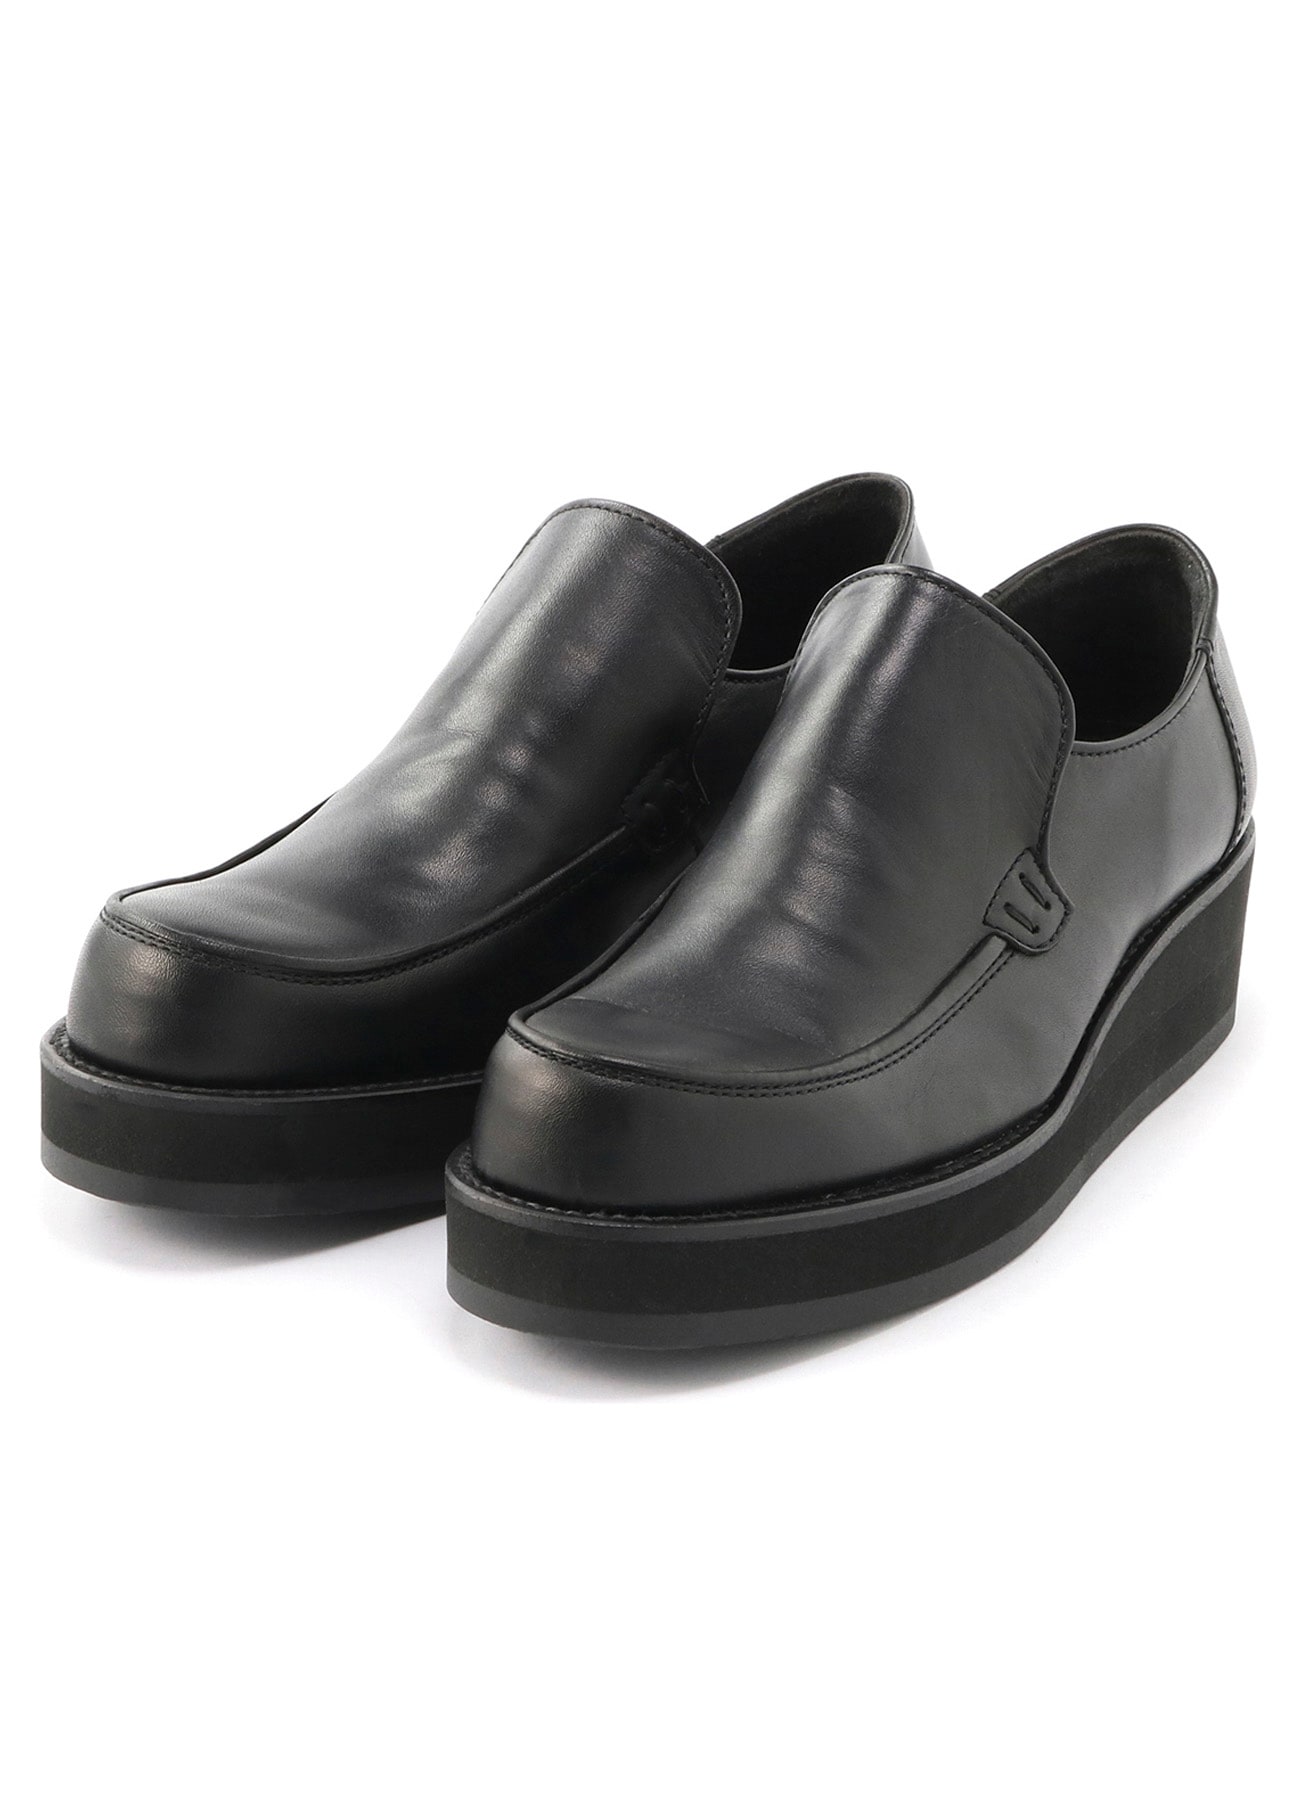 Y’s x Dr.Martens 3 EYE HOLE SHOES